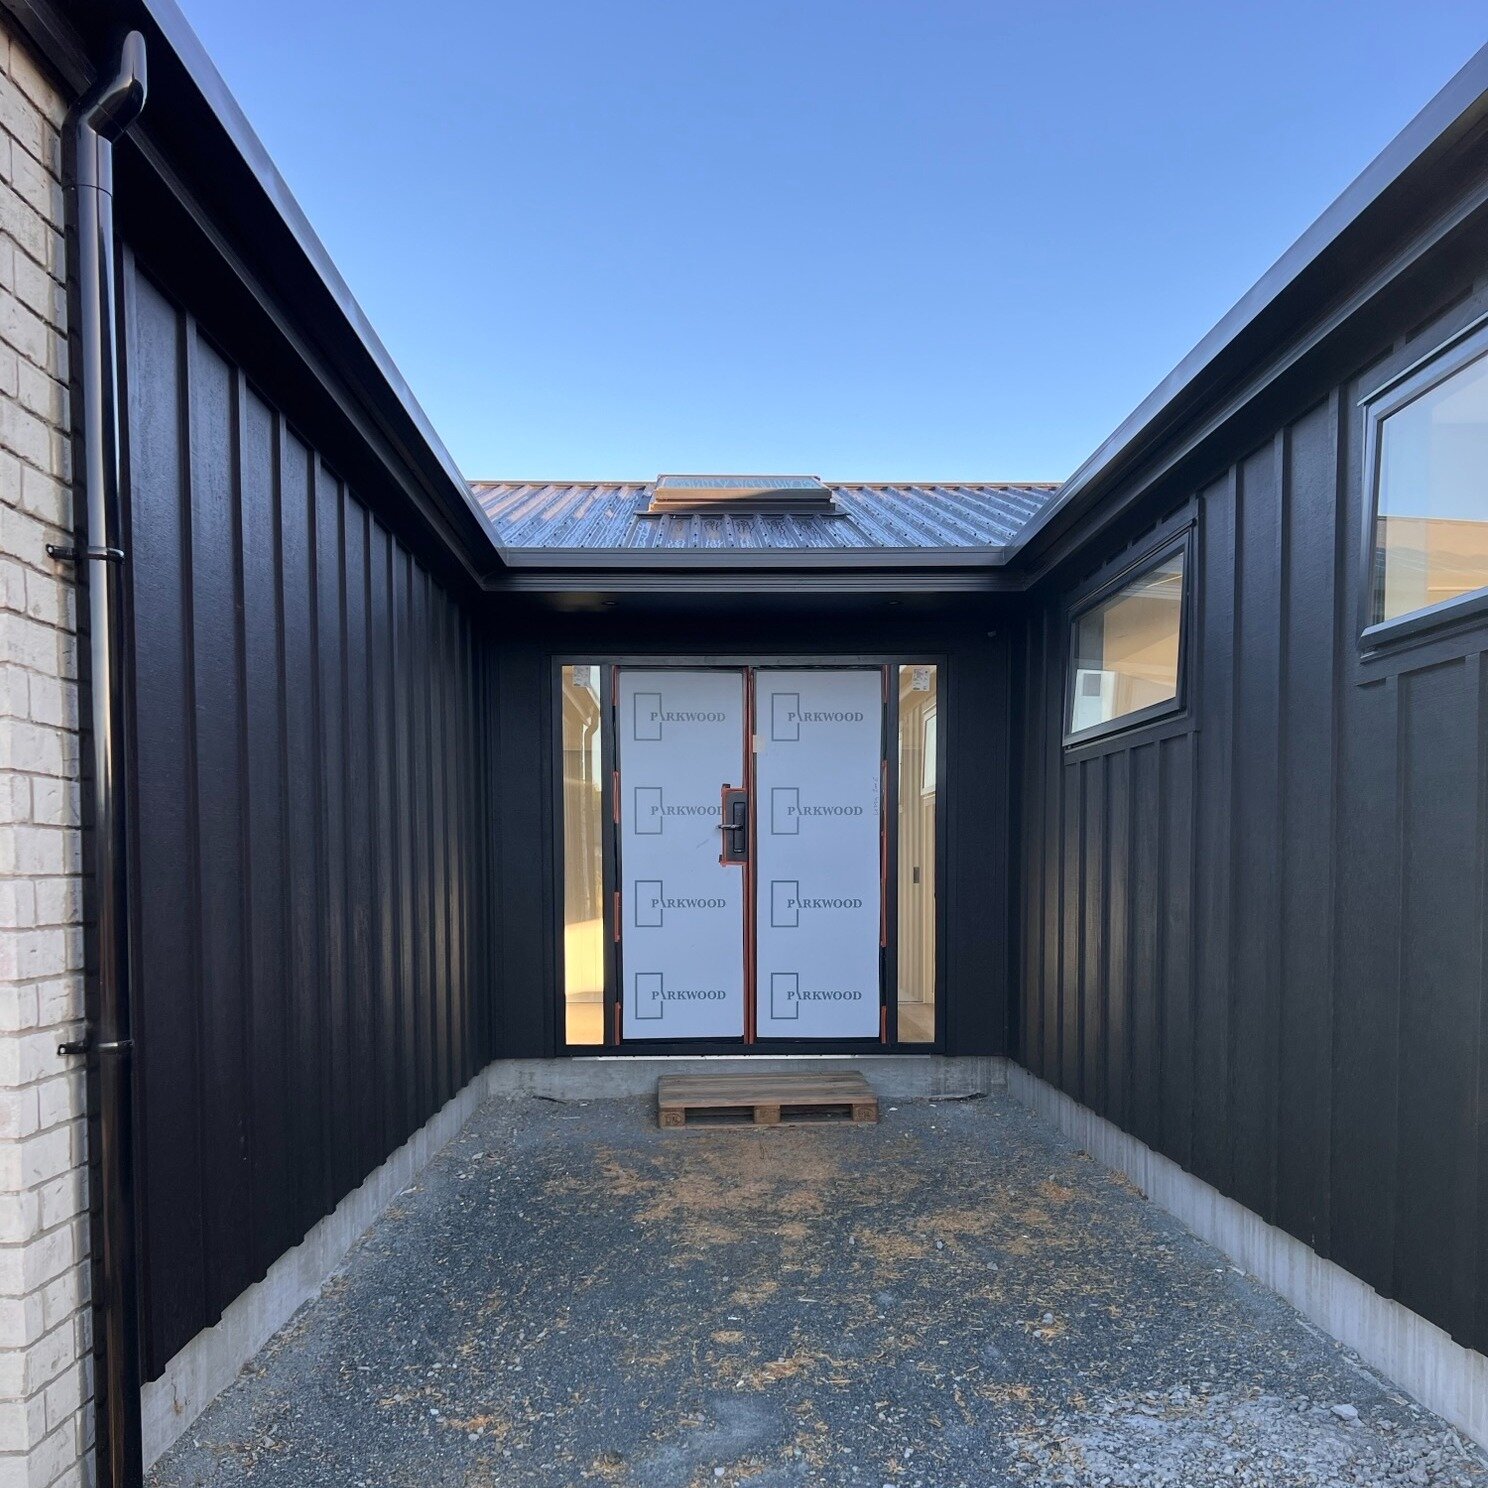 For those of you who missed the open day at 15 Wakanini Place, Mapua last weekend here are some pics of this awesome build! If skylights are your thing you'll be spoiled with the amount we have put in this build. Landscaping will be completed &amp; t